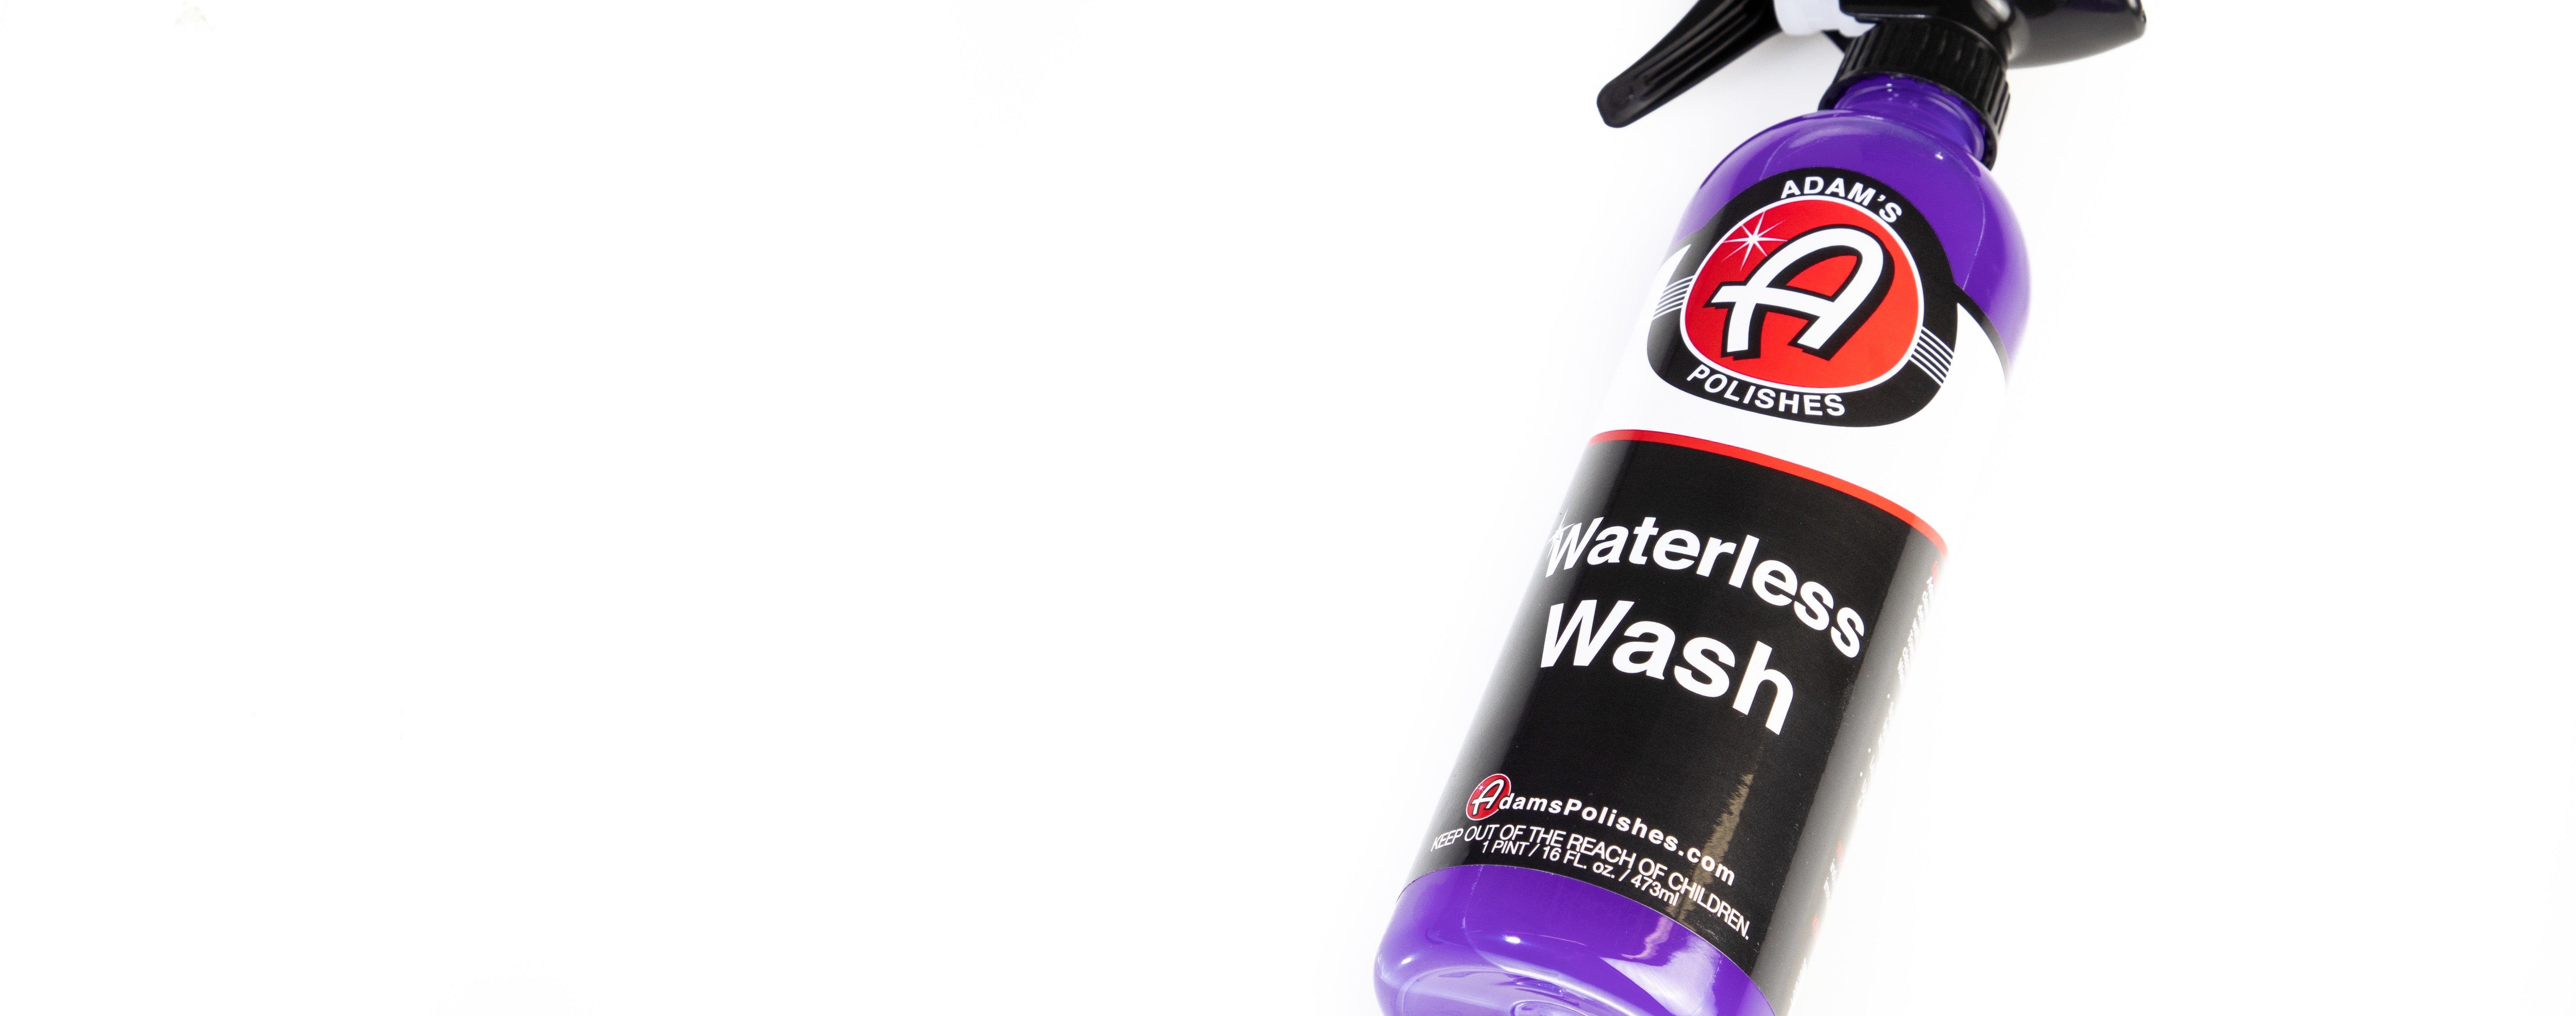  Adam's Waterless Wash (16oz) - Car Cleaning Car Wash Spray for  Car Detailing, Safe Ultra Slick Lubricating Formula for Car, Boat,  Motorcycle, RV